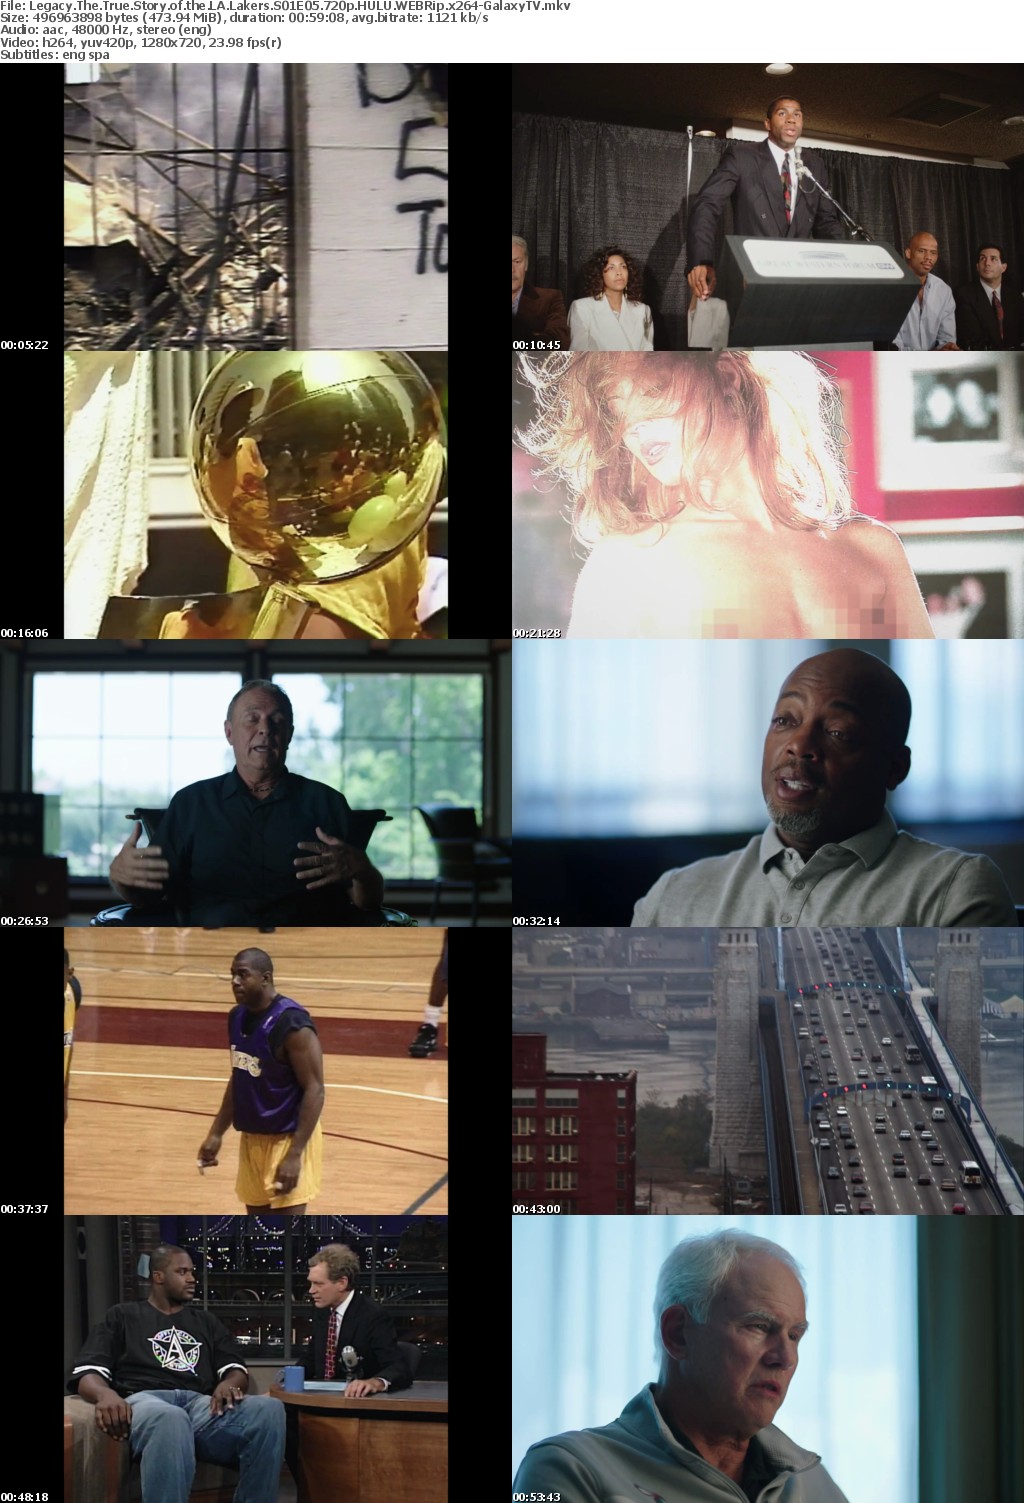 Legacy The True Story of the LA Lakers S01 COMPLETE 720p HULU WEBRip x264-GalaxyTV